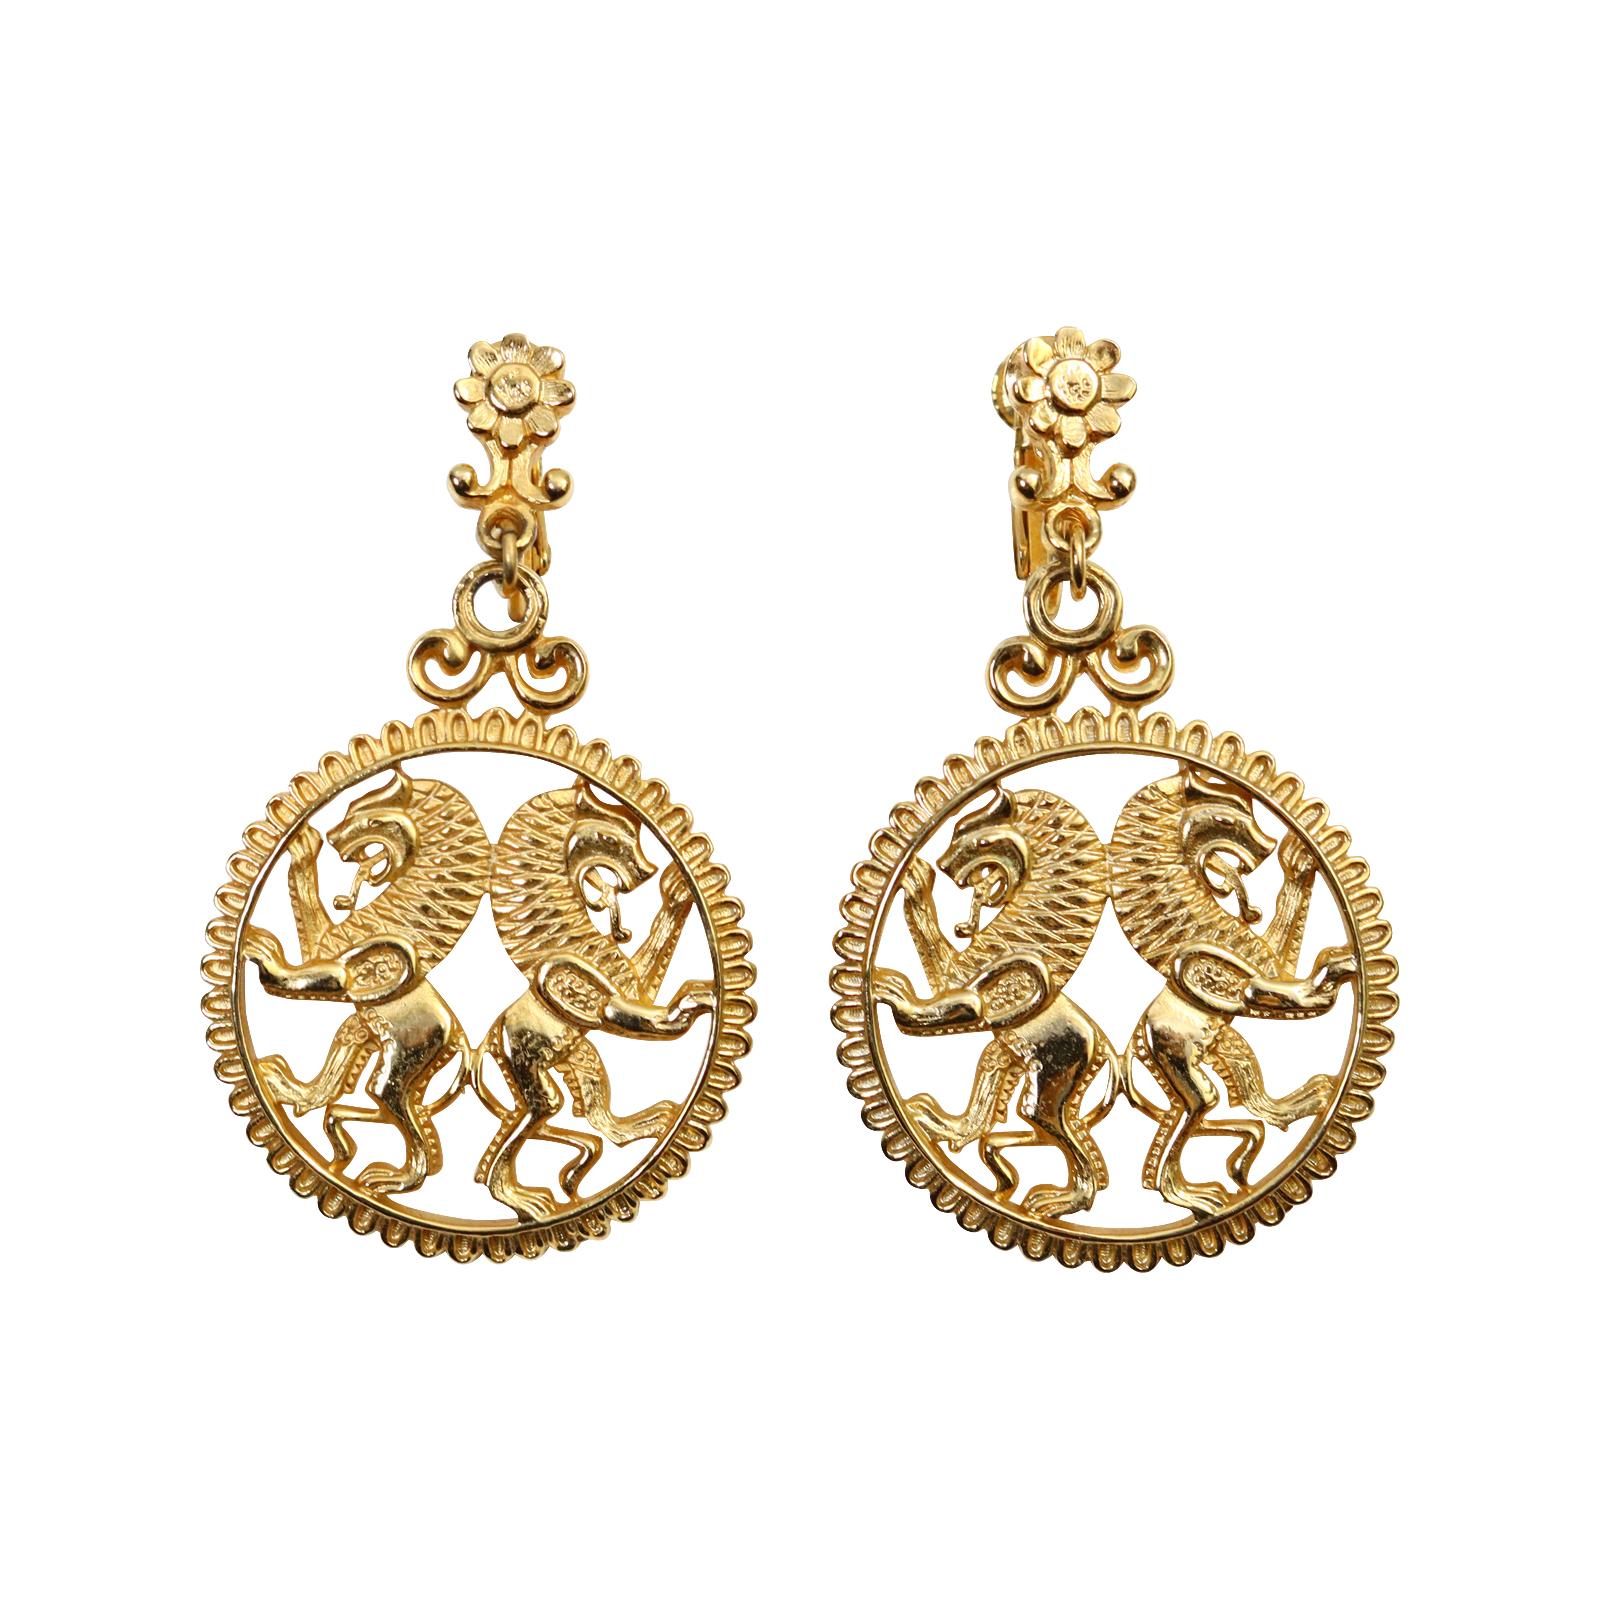 Vintage Vendome Gold Tone Dangling Double Lion Earrings Circa 1970s.  These have the most divine look on. Clip on. These double lions are so regal looking and make such a statement.  From the top of the earring which has a detail flower to the